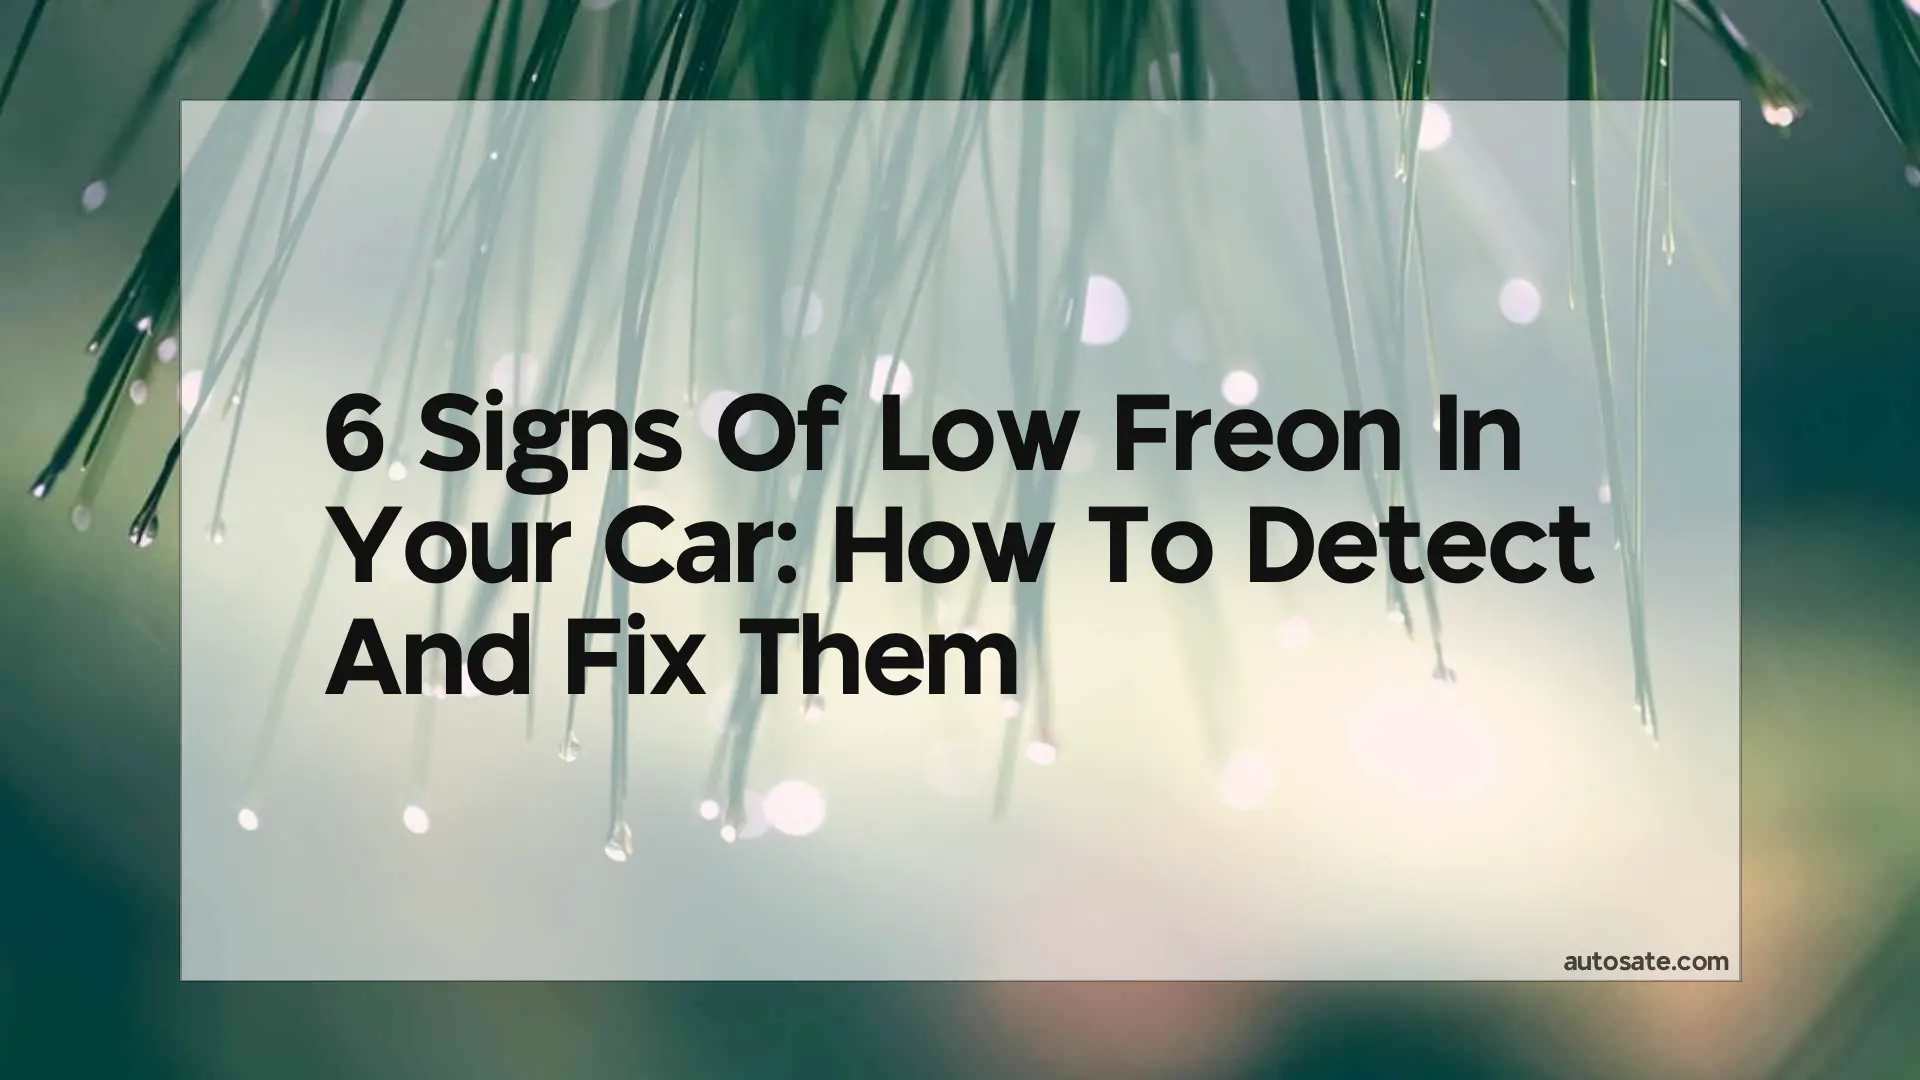 6 Signs Of Low Freon In Your Car: How To Detect And Fix Them